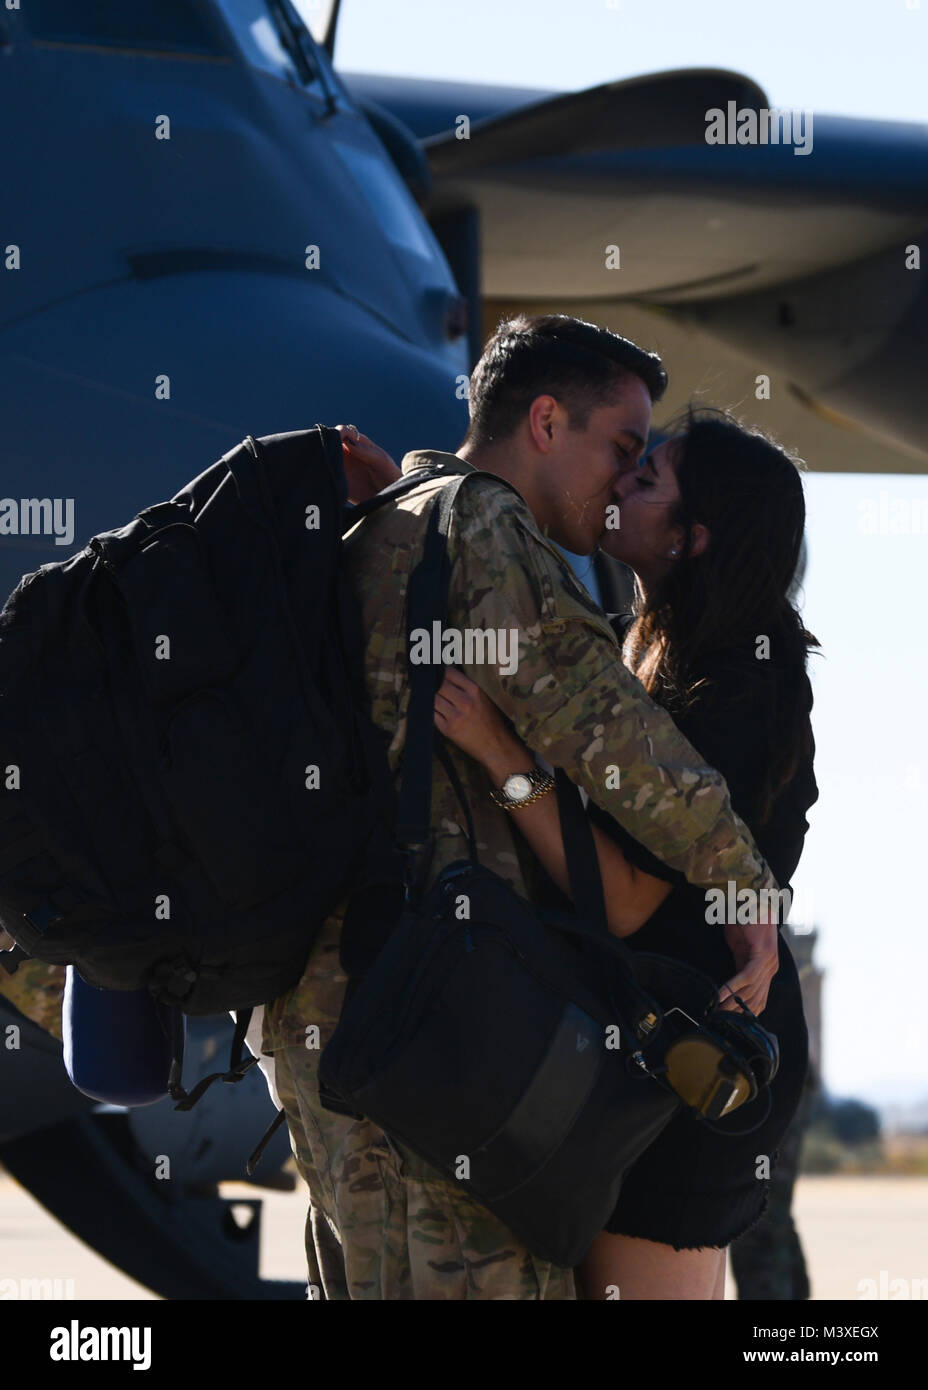 U.S. Air Force Staff Sgt. Arturo Paz, 923rd Aircraft Maintenance Squadron instrument and flight control systems technician, kisses his girlfriend after returning from a deployment in support of Combined Joint Task Force Operation Inherent Resolve at Davis-Monthan Air Force Base, Ariz., Feb. 6, 2018. Members from both the 79th RQS and the 923rd Aircraft Maintenance Squadron returned after a 120 day deployment where they were on alert for combat search and rescue, and personnel recovery missions. (U.S. Air Force photo by Staff Sgt. Chris Drzazgowski) Stock Photo